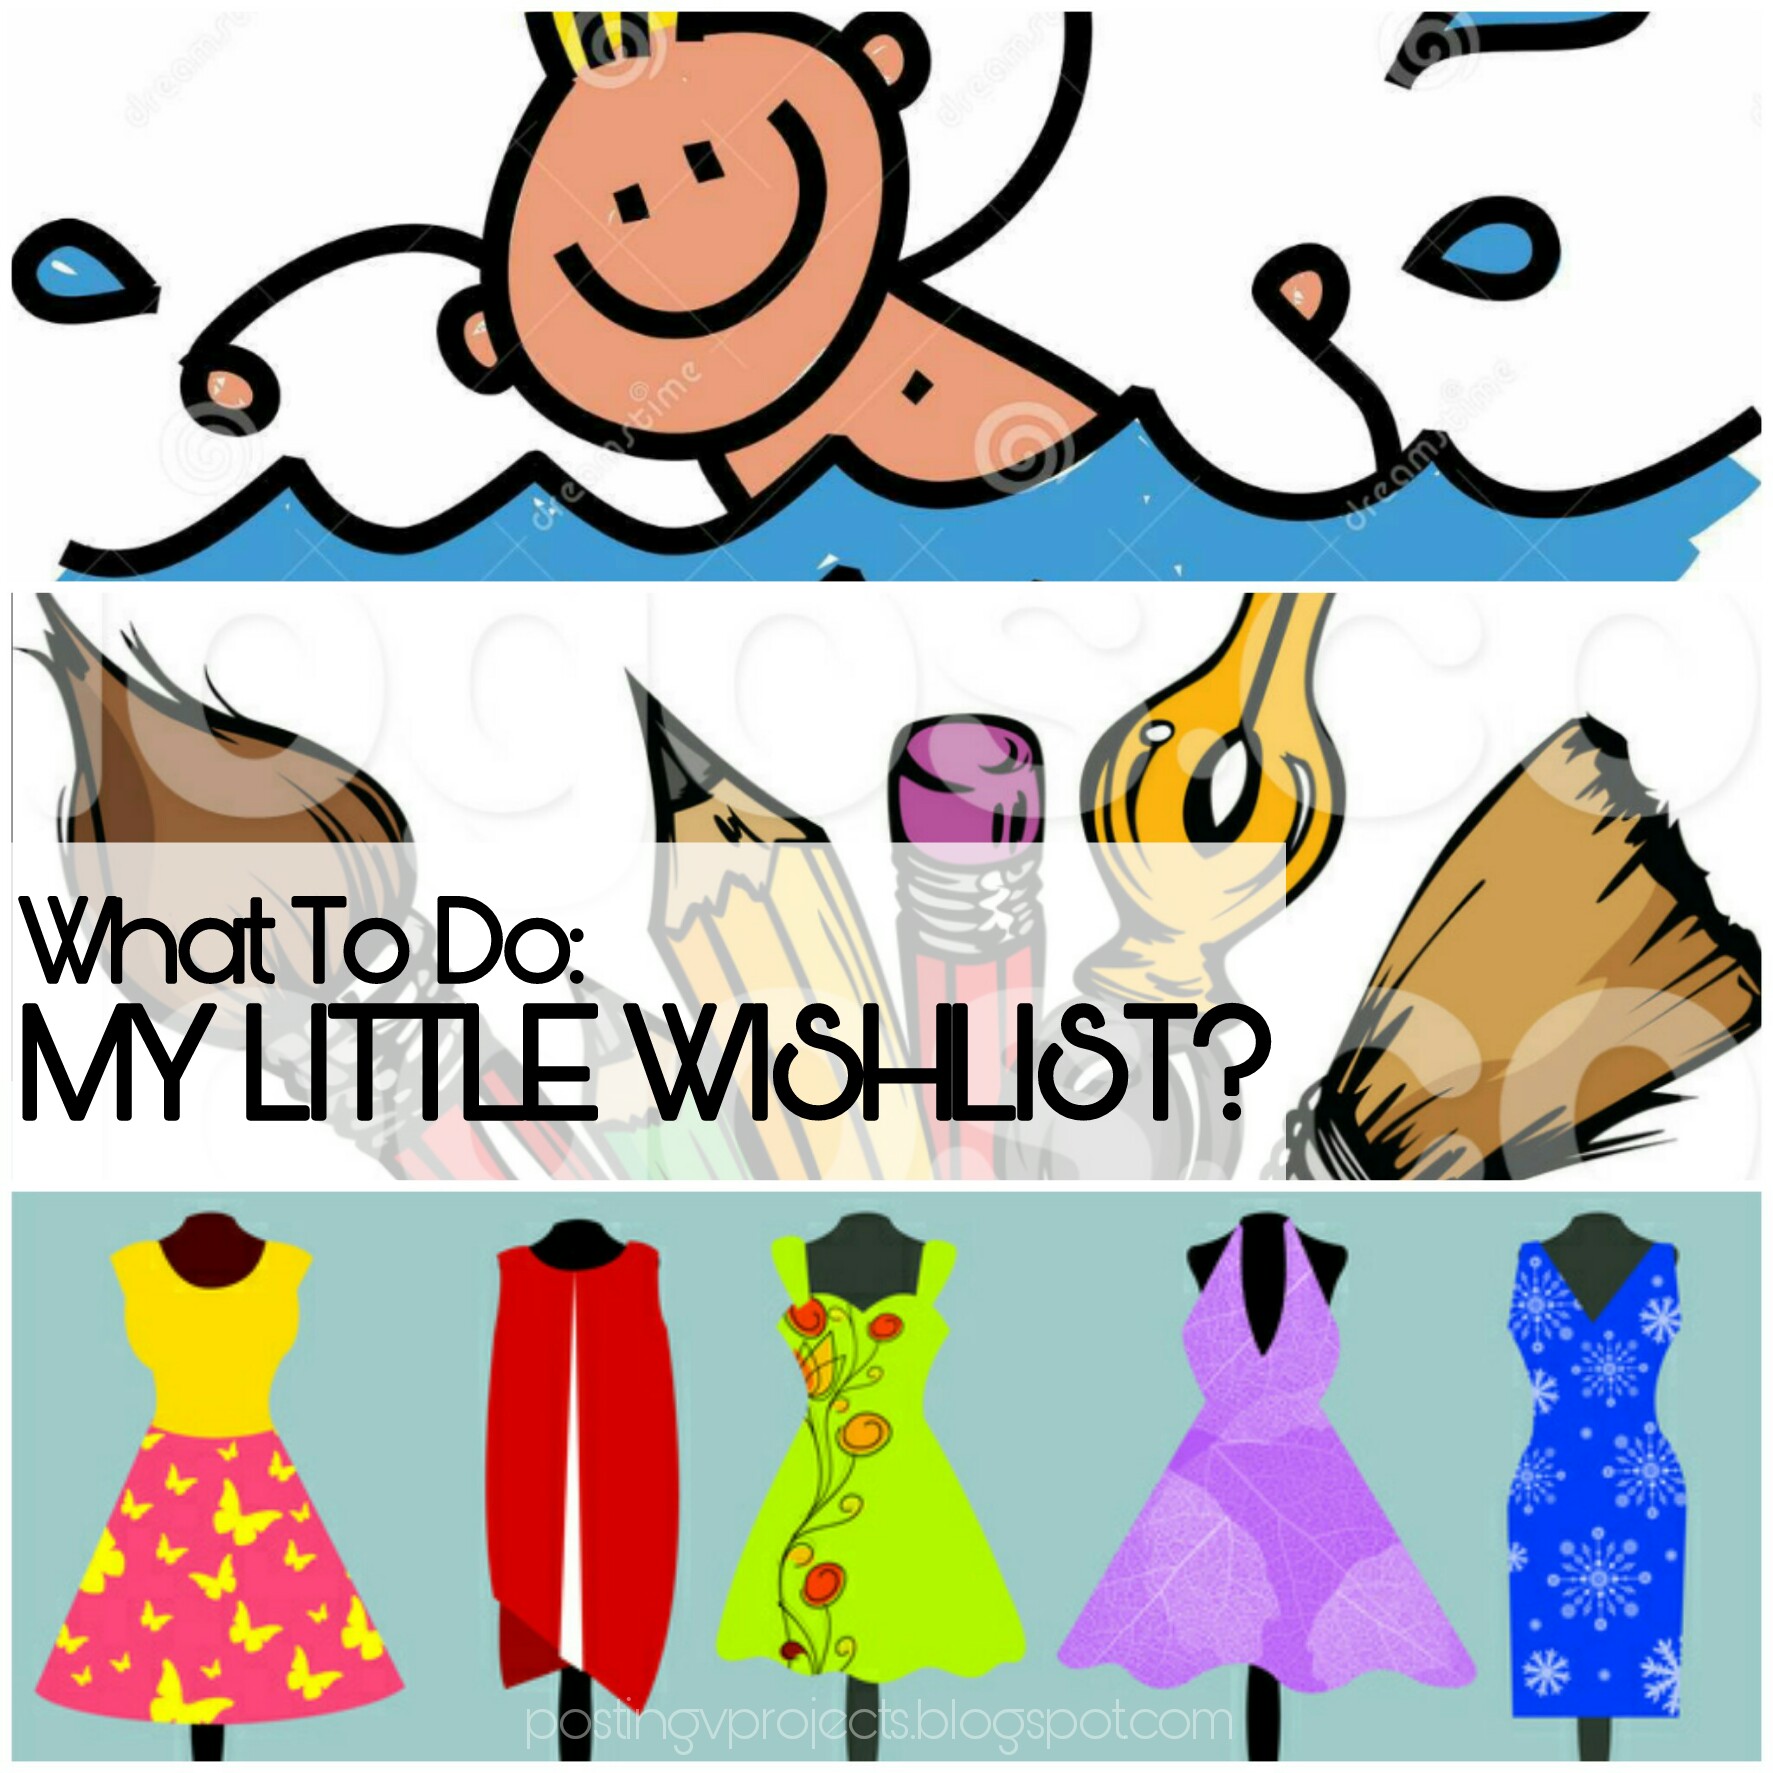 What To Do: MY LITTLE WISHLIST?